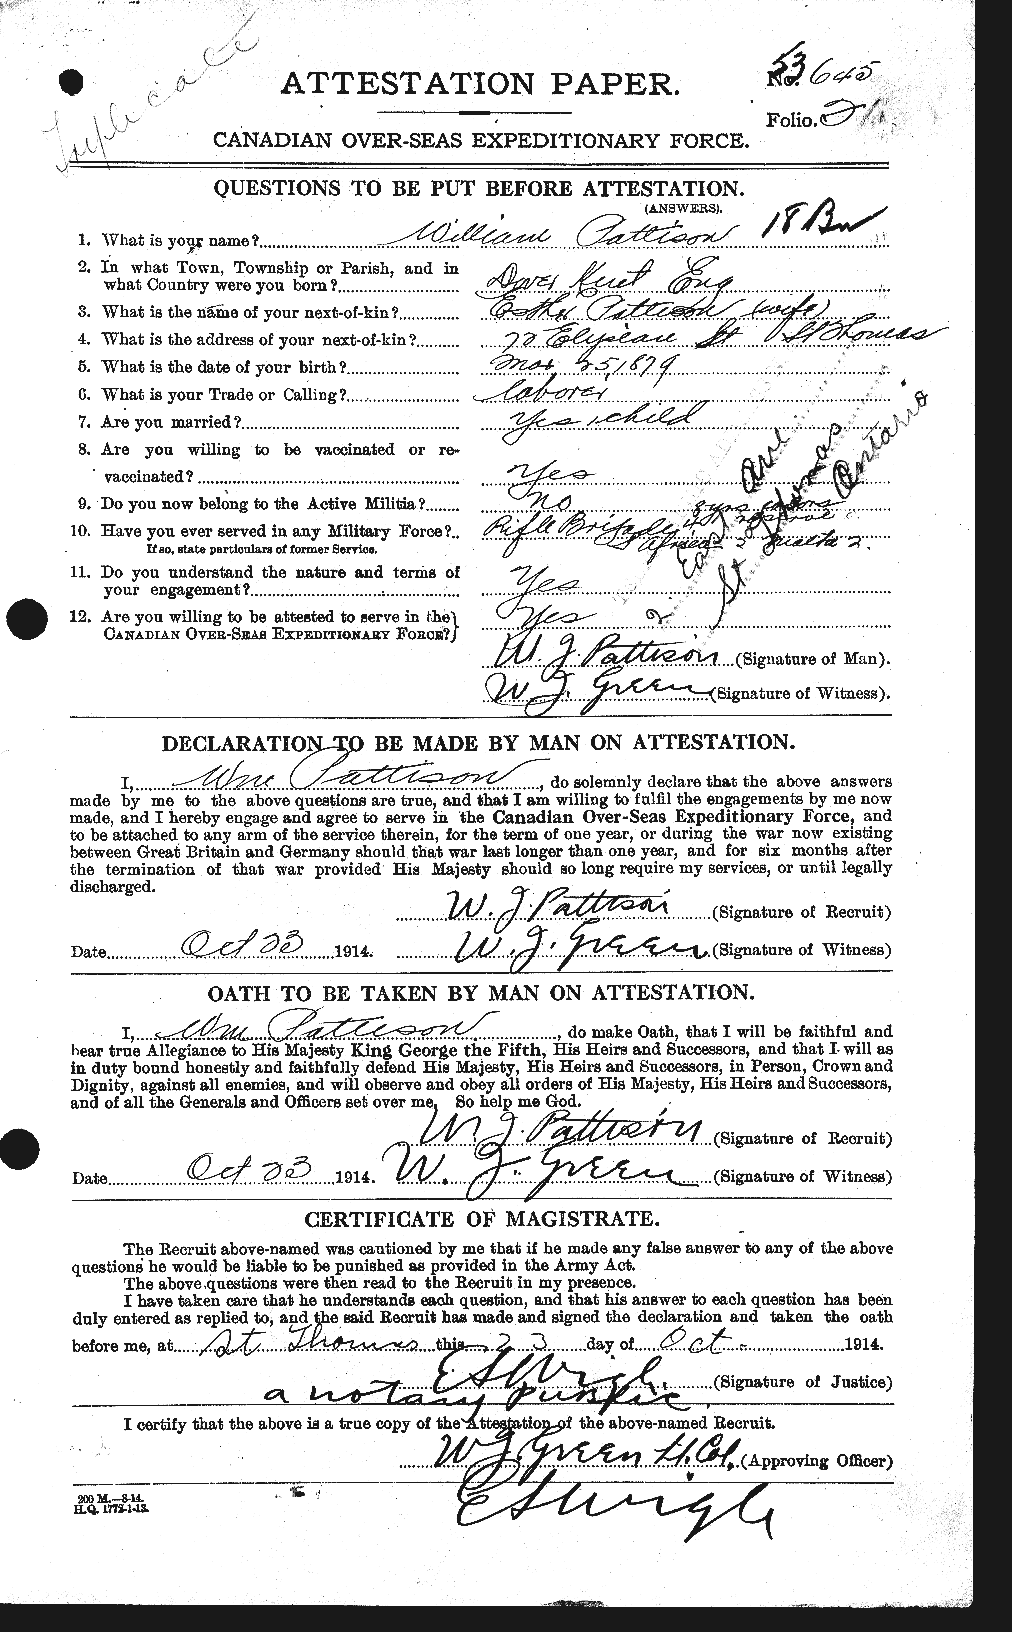 Personnel Records of the First World War - CEF 568989a